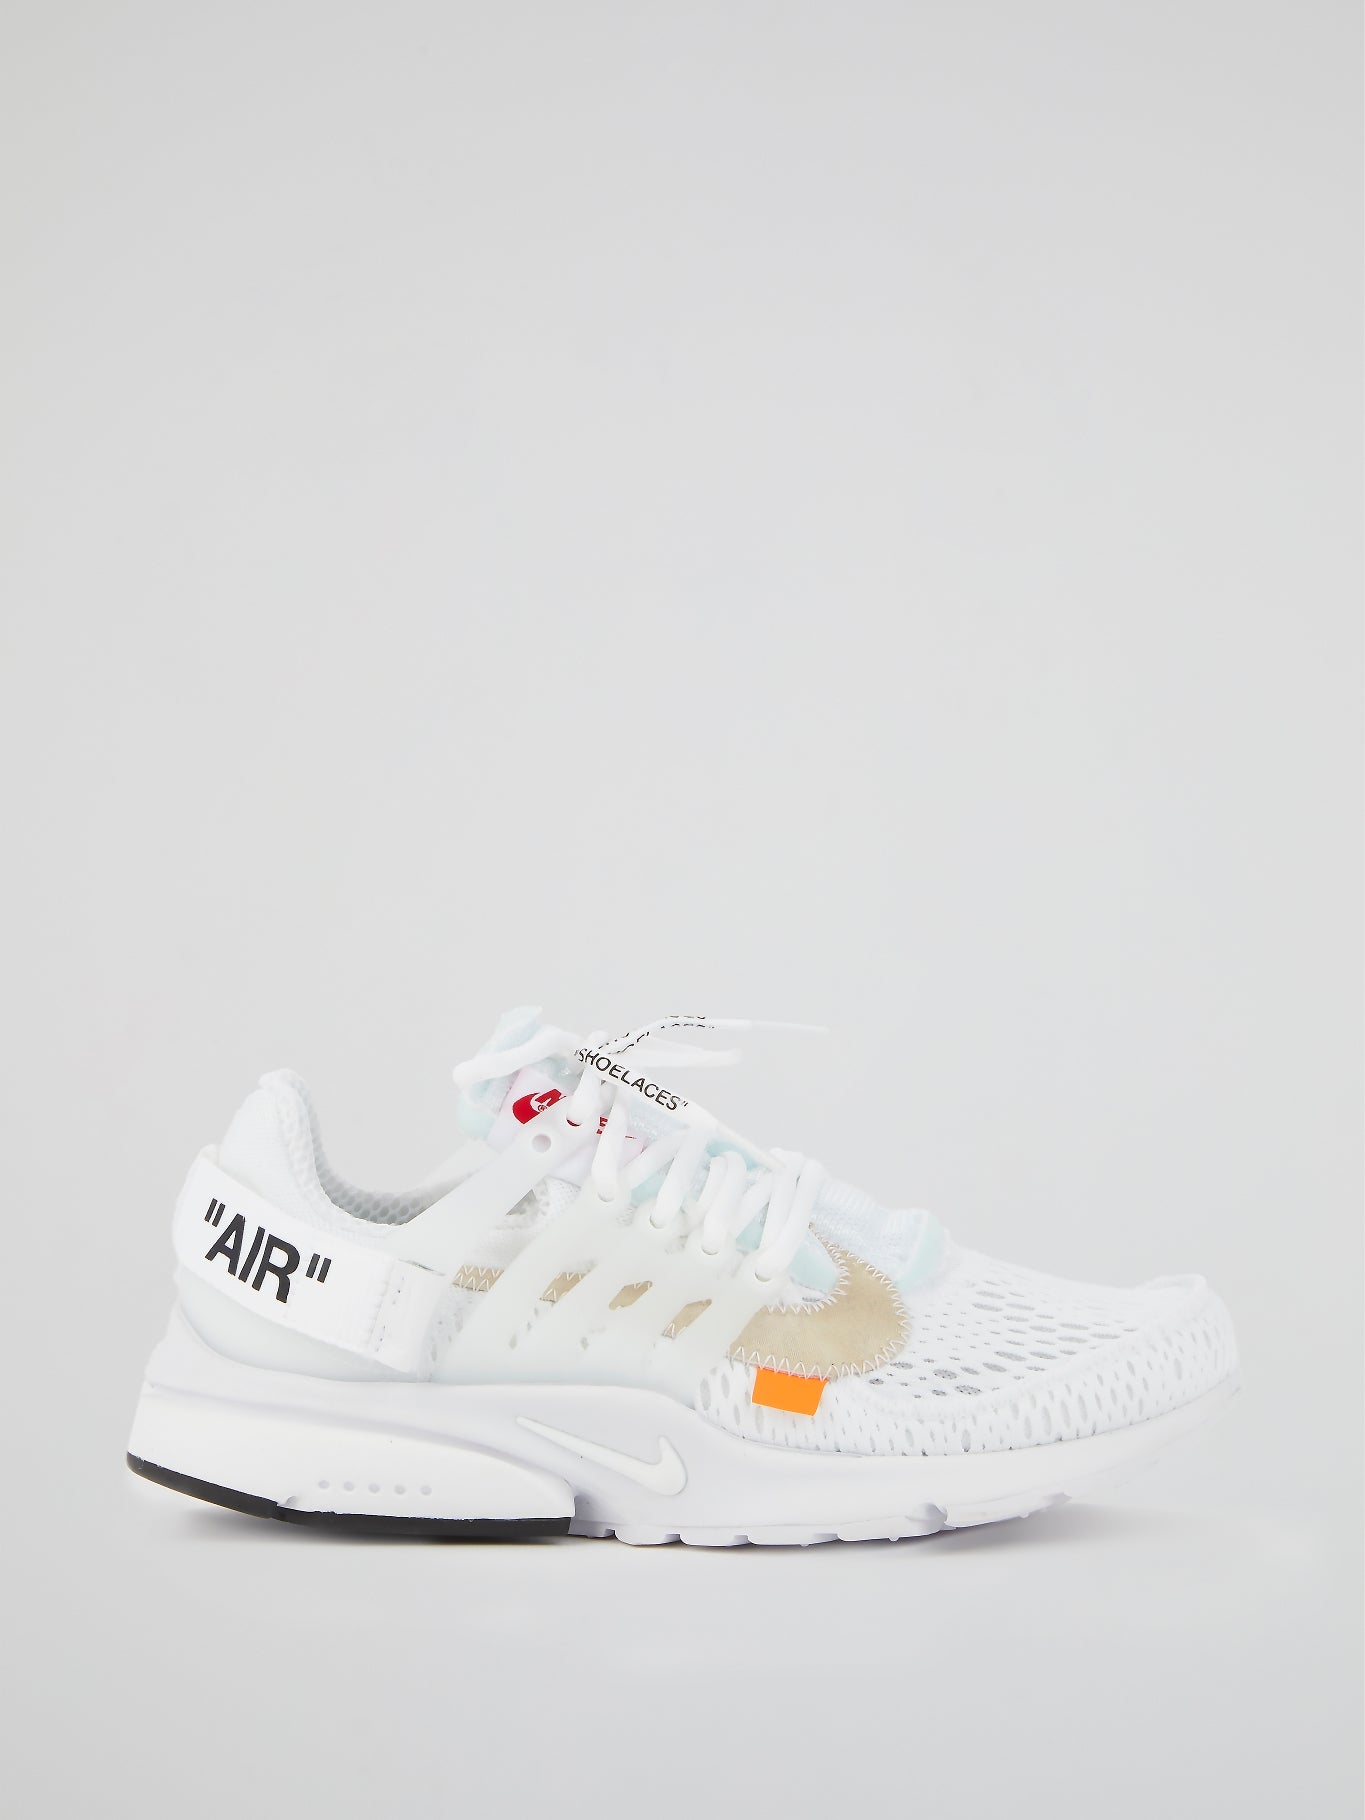 X Off-White The 10 Air Presto Sneakers (Size 5) – Global